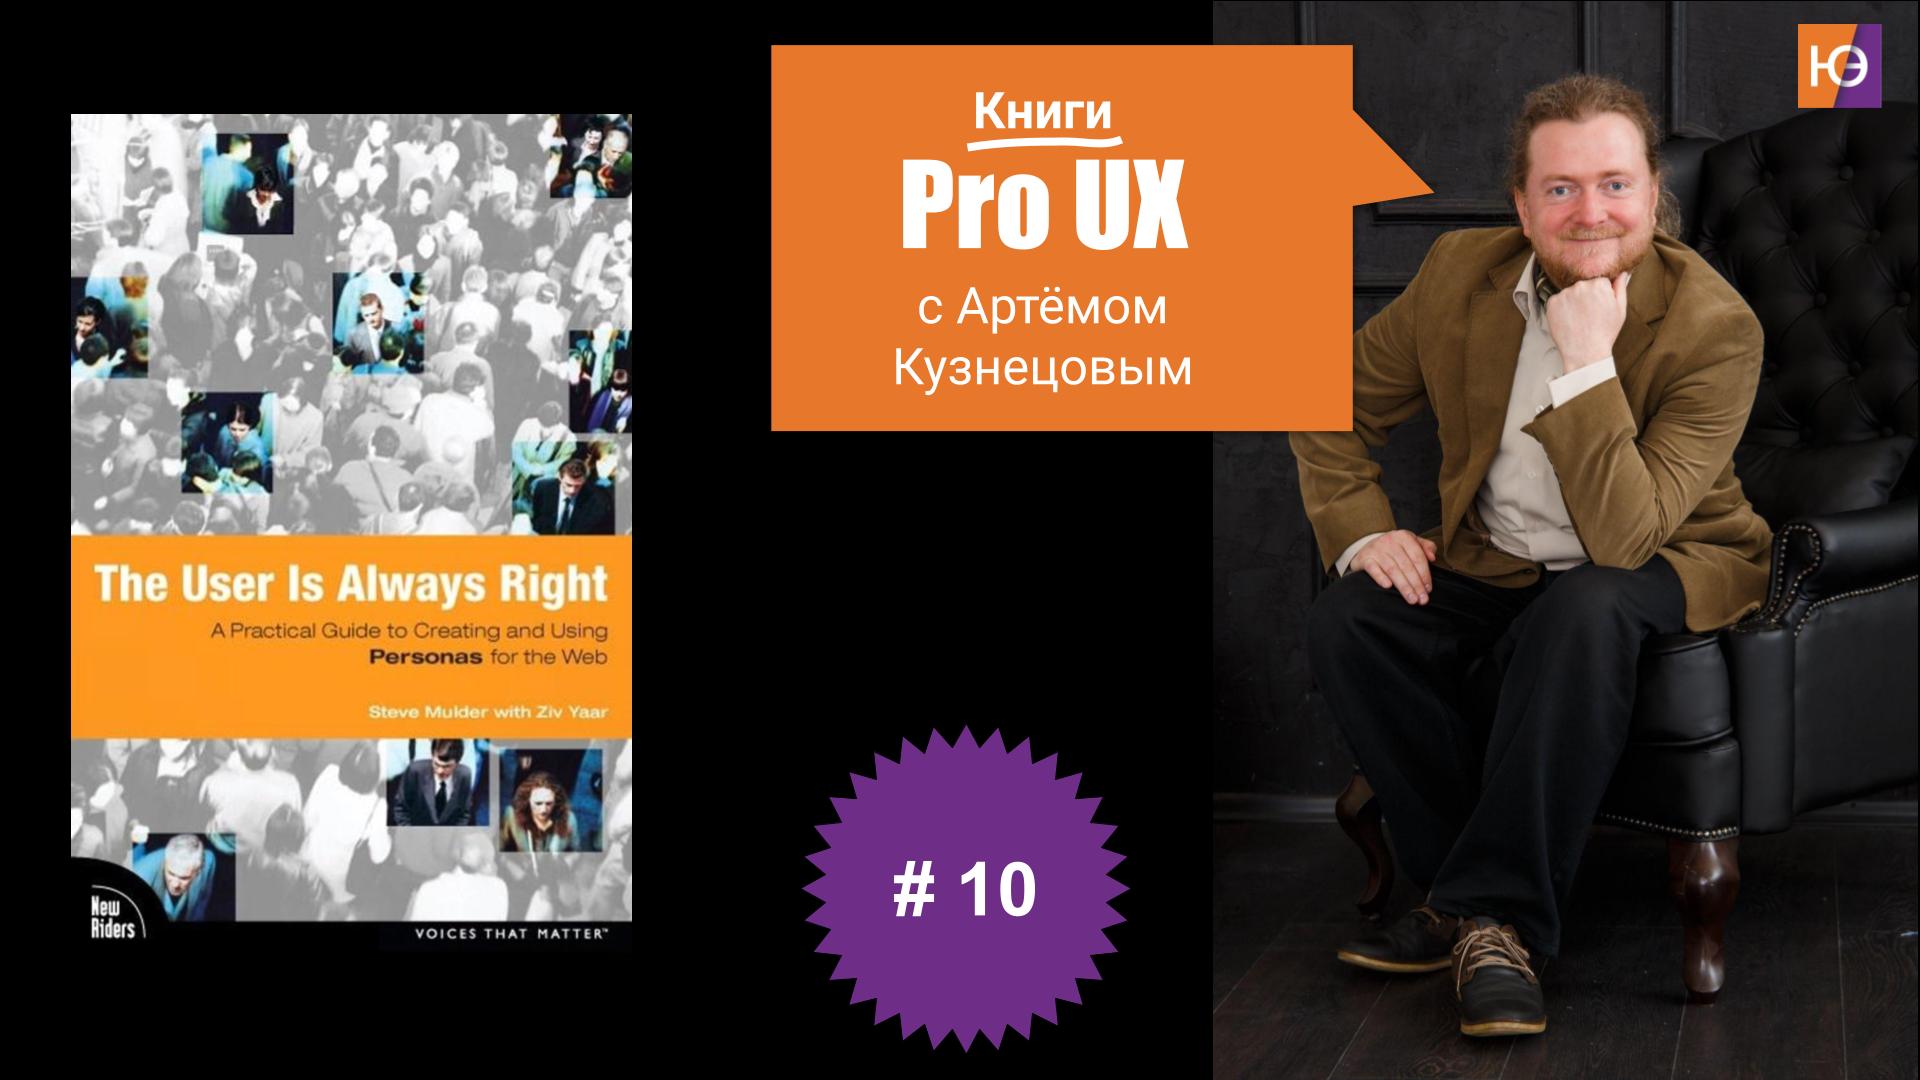 Книги Pro UX c Артёмом Кузнецовым #10 – Steve Mulder “The User Is Always Right: A Practical Guide to Creating and Using Personas for the Web”